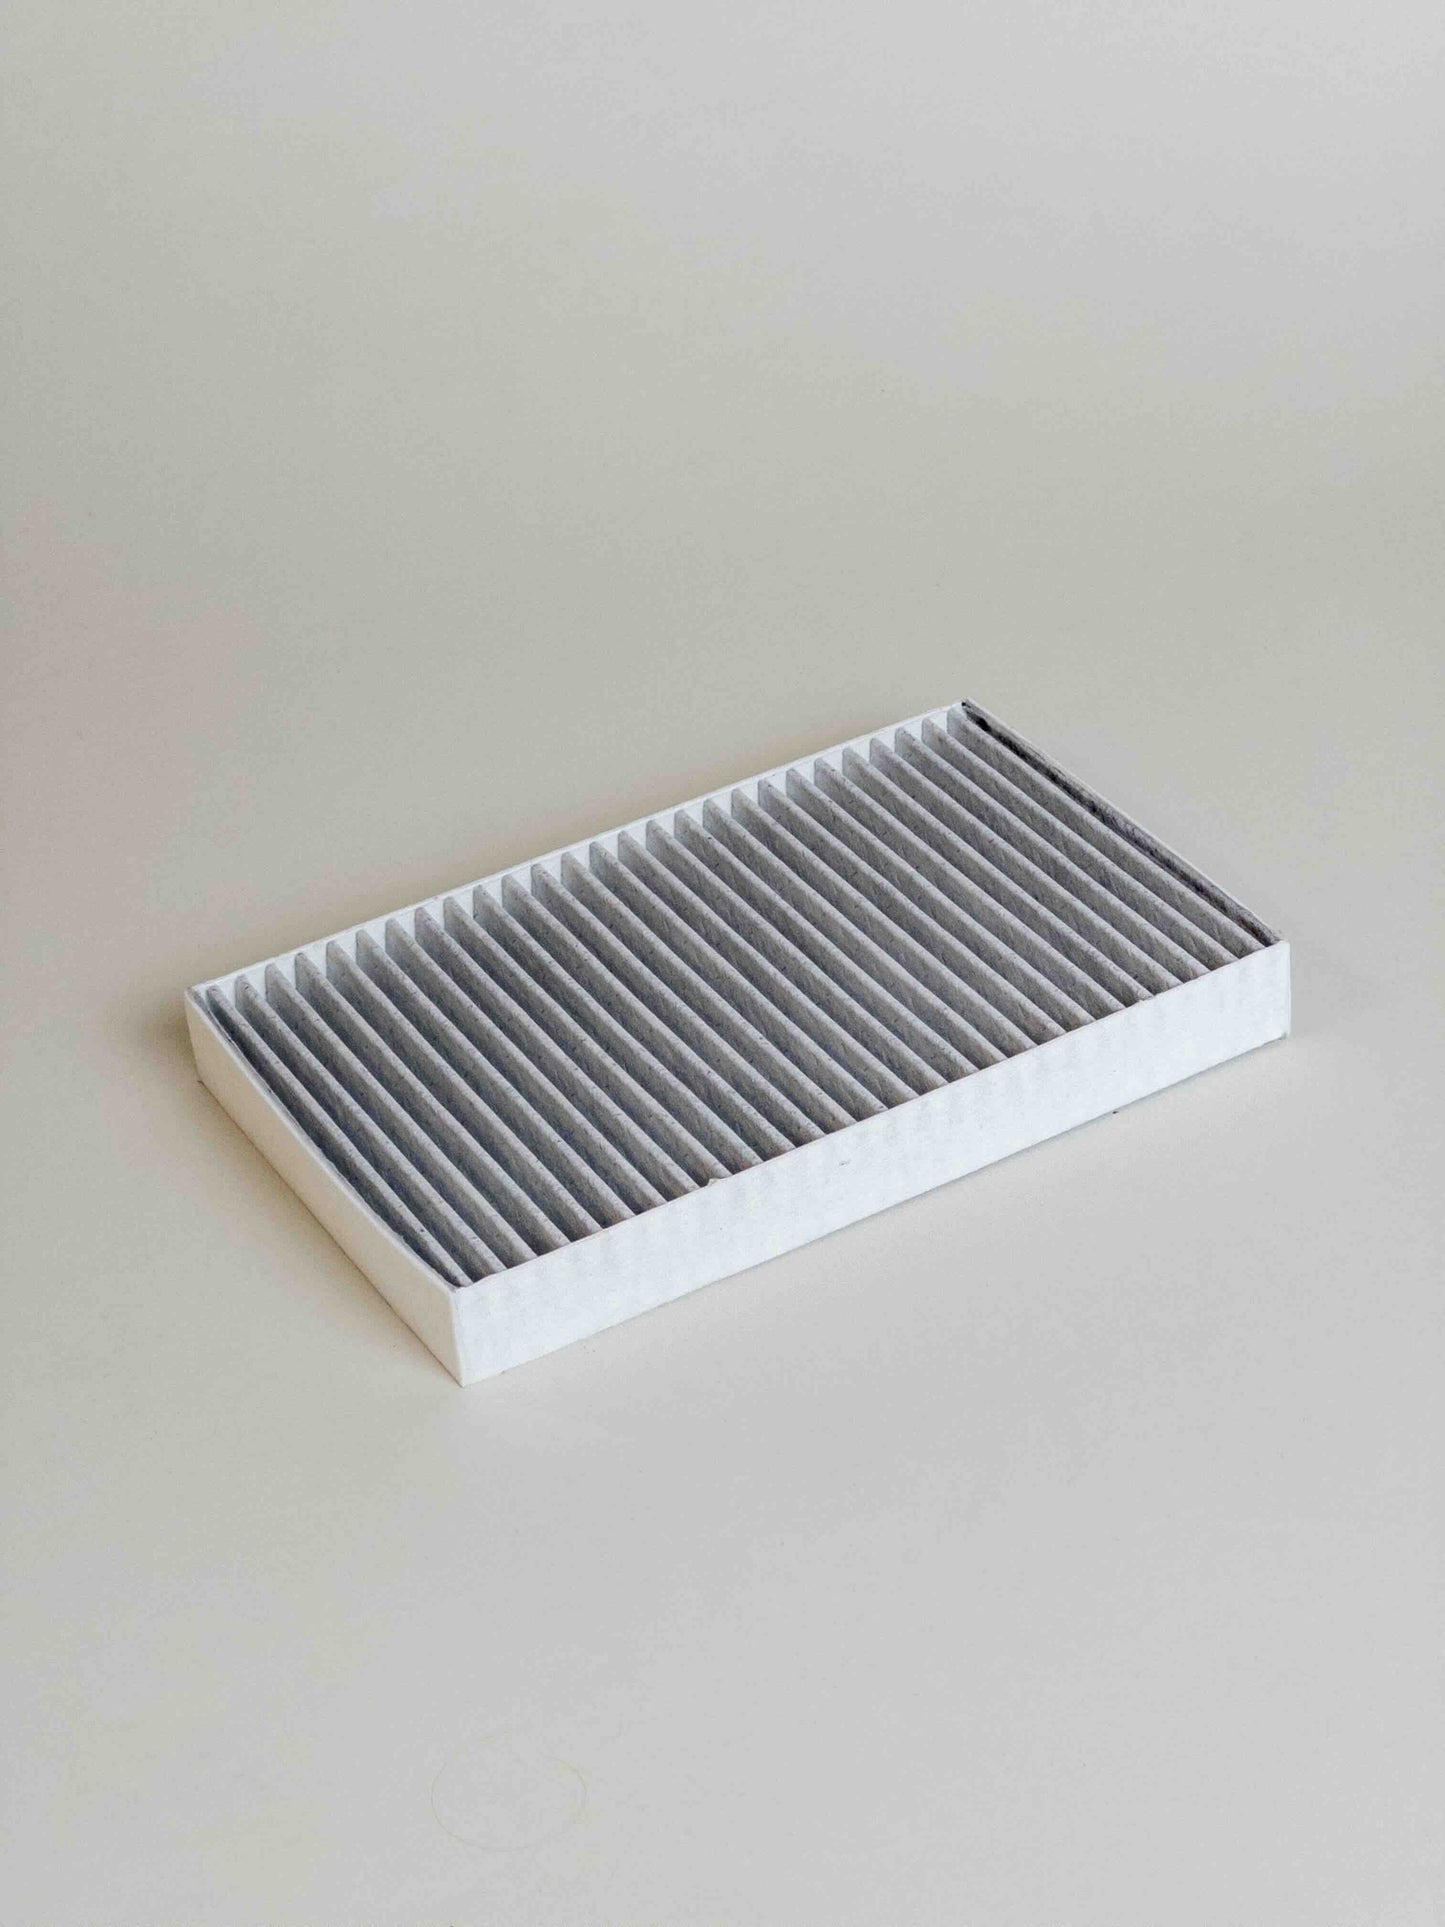 Model S cabin filter 2012 and later